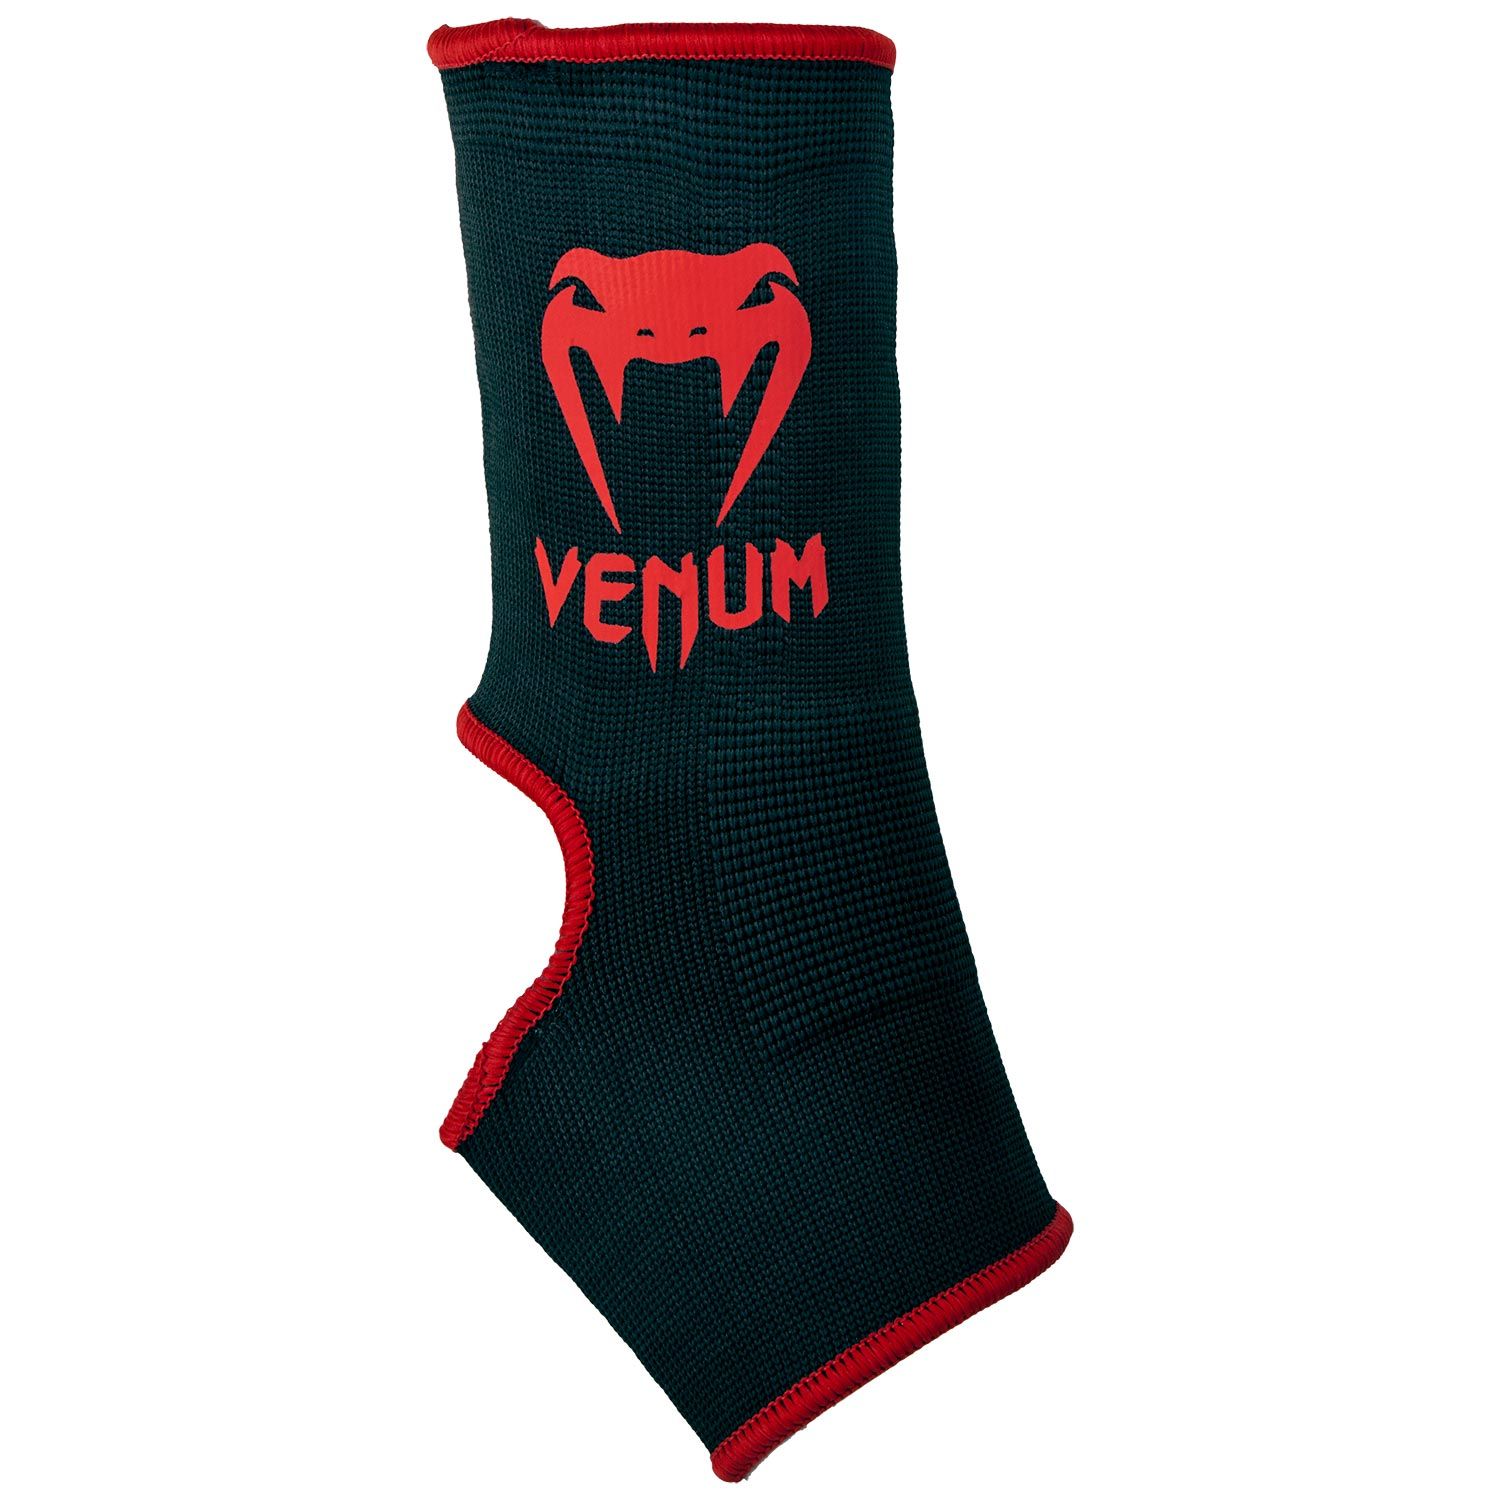 Venum Kontact Ankle Support - Black/Red